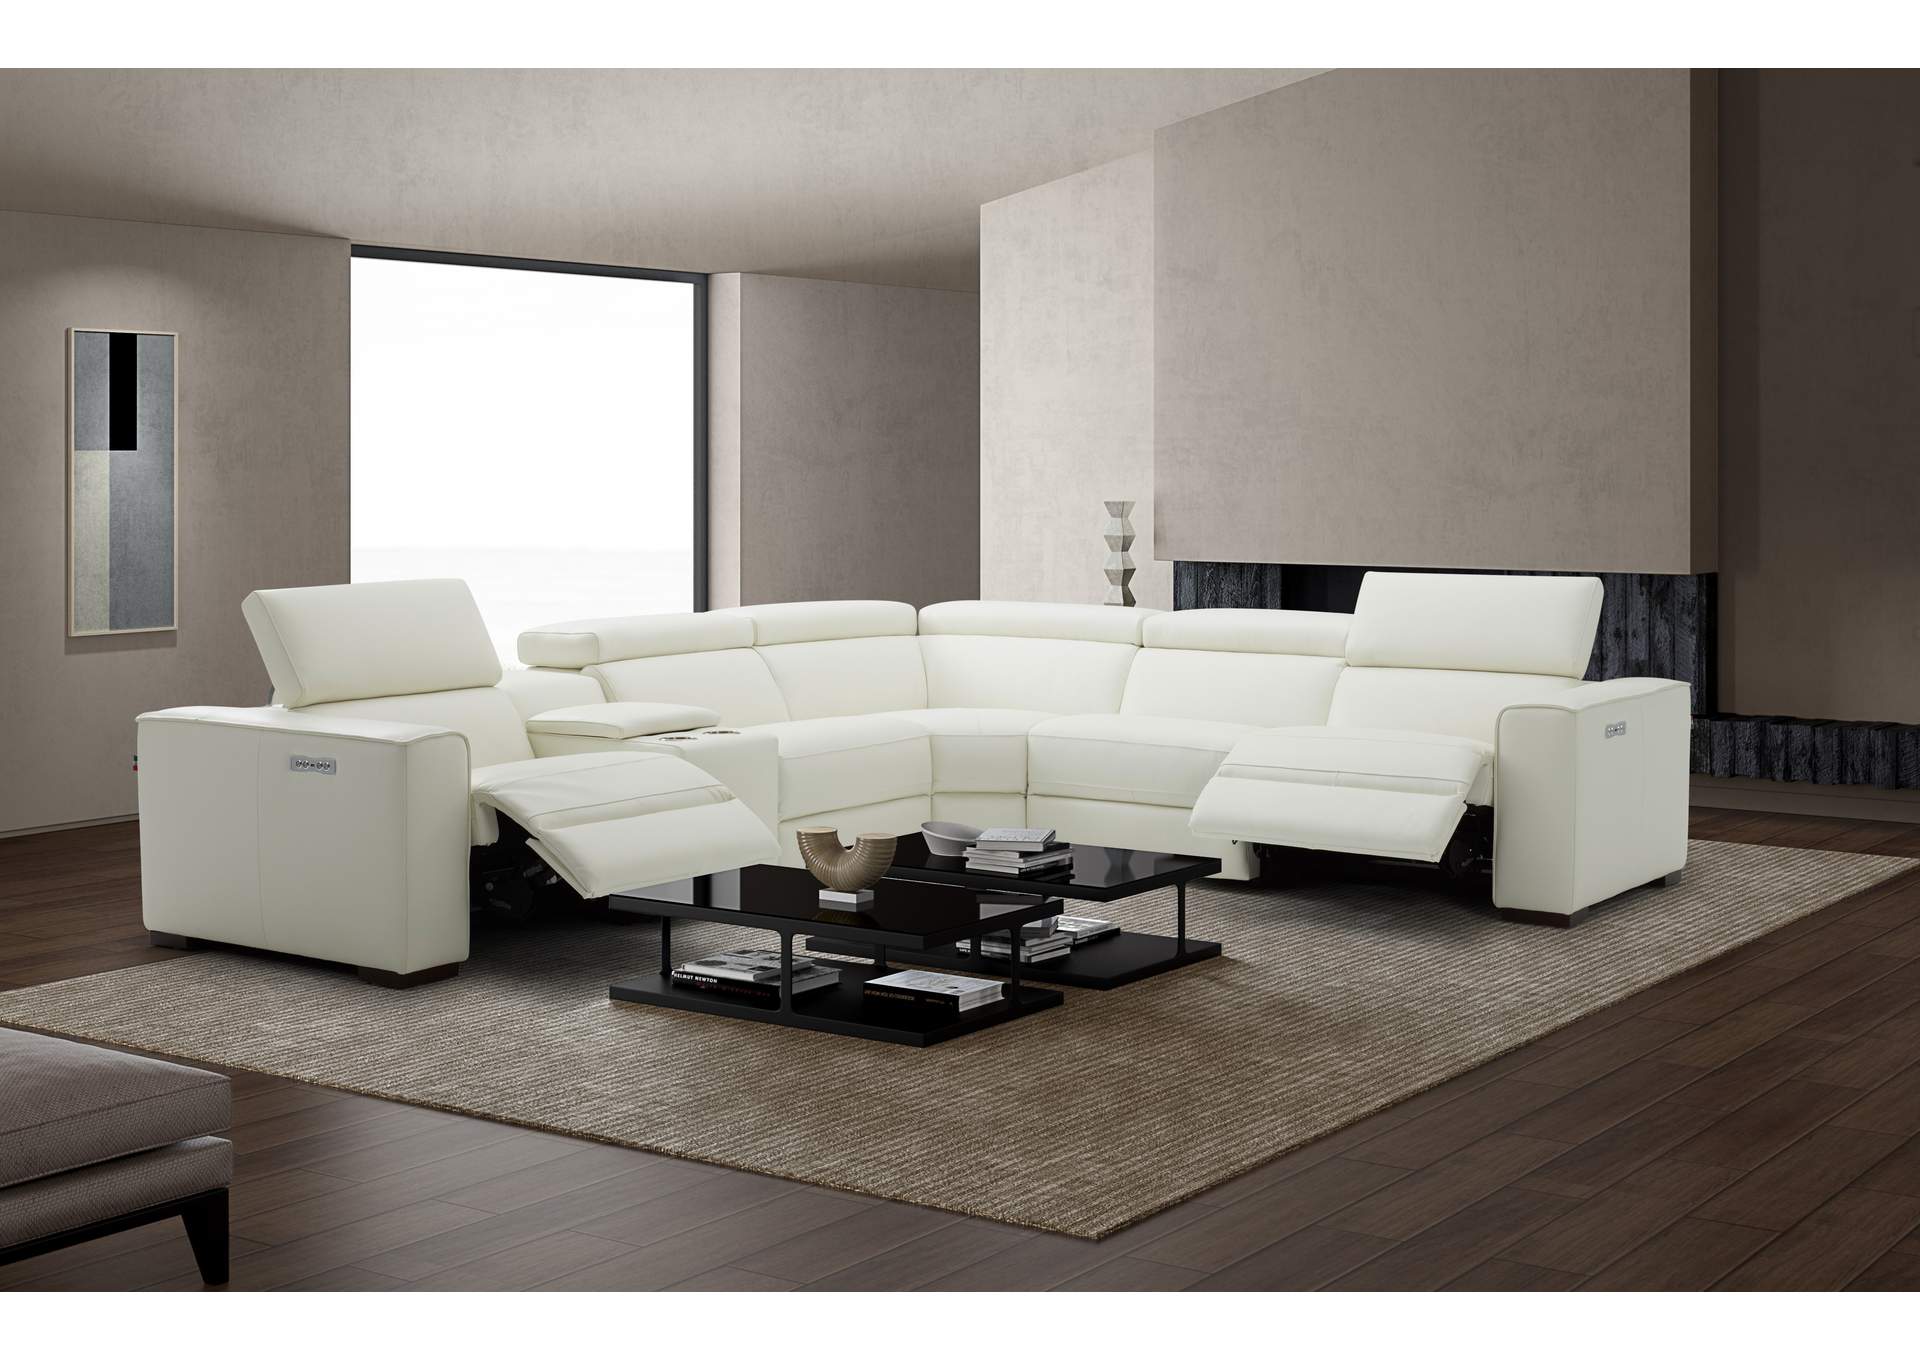 Picasso Motion Sectional In White,J&M Furniture